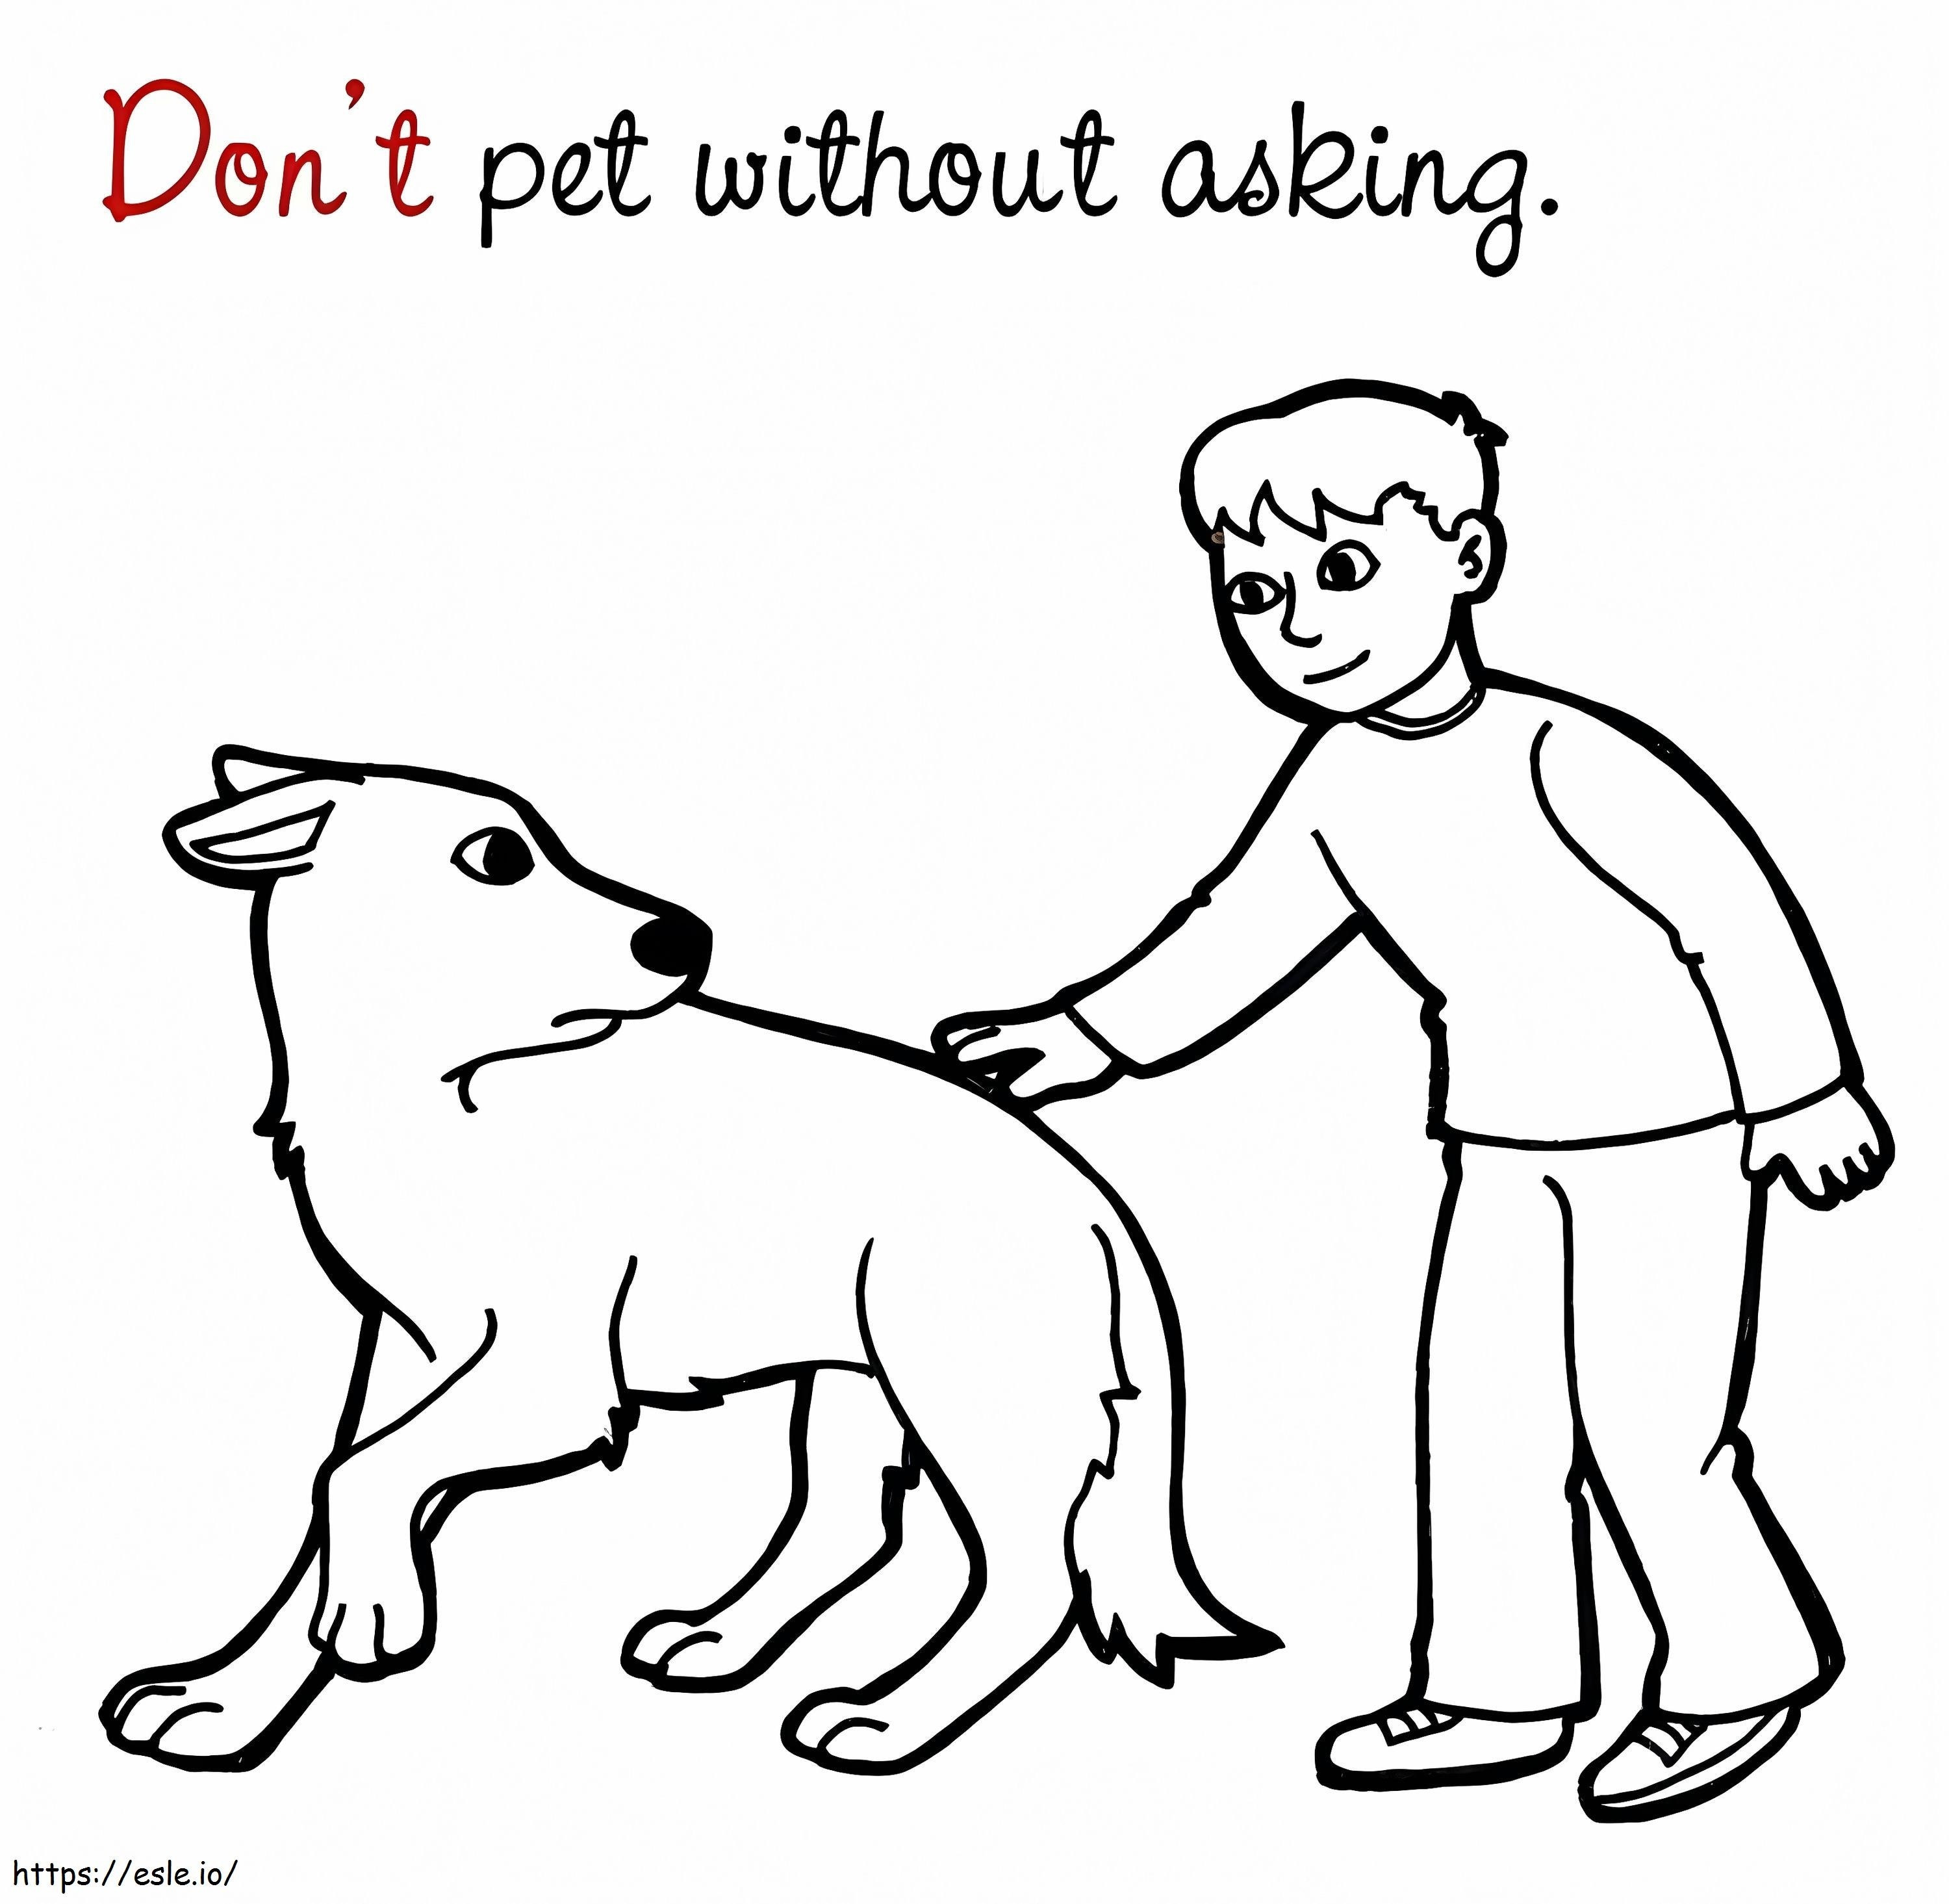 Dont Pet Without Asking coloring page